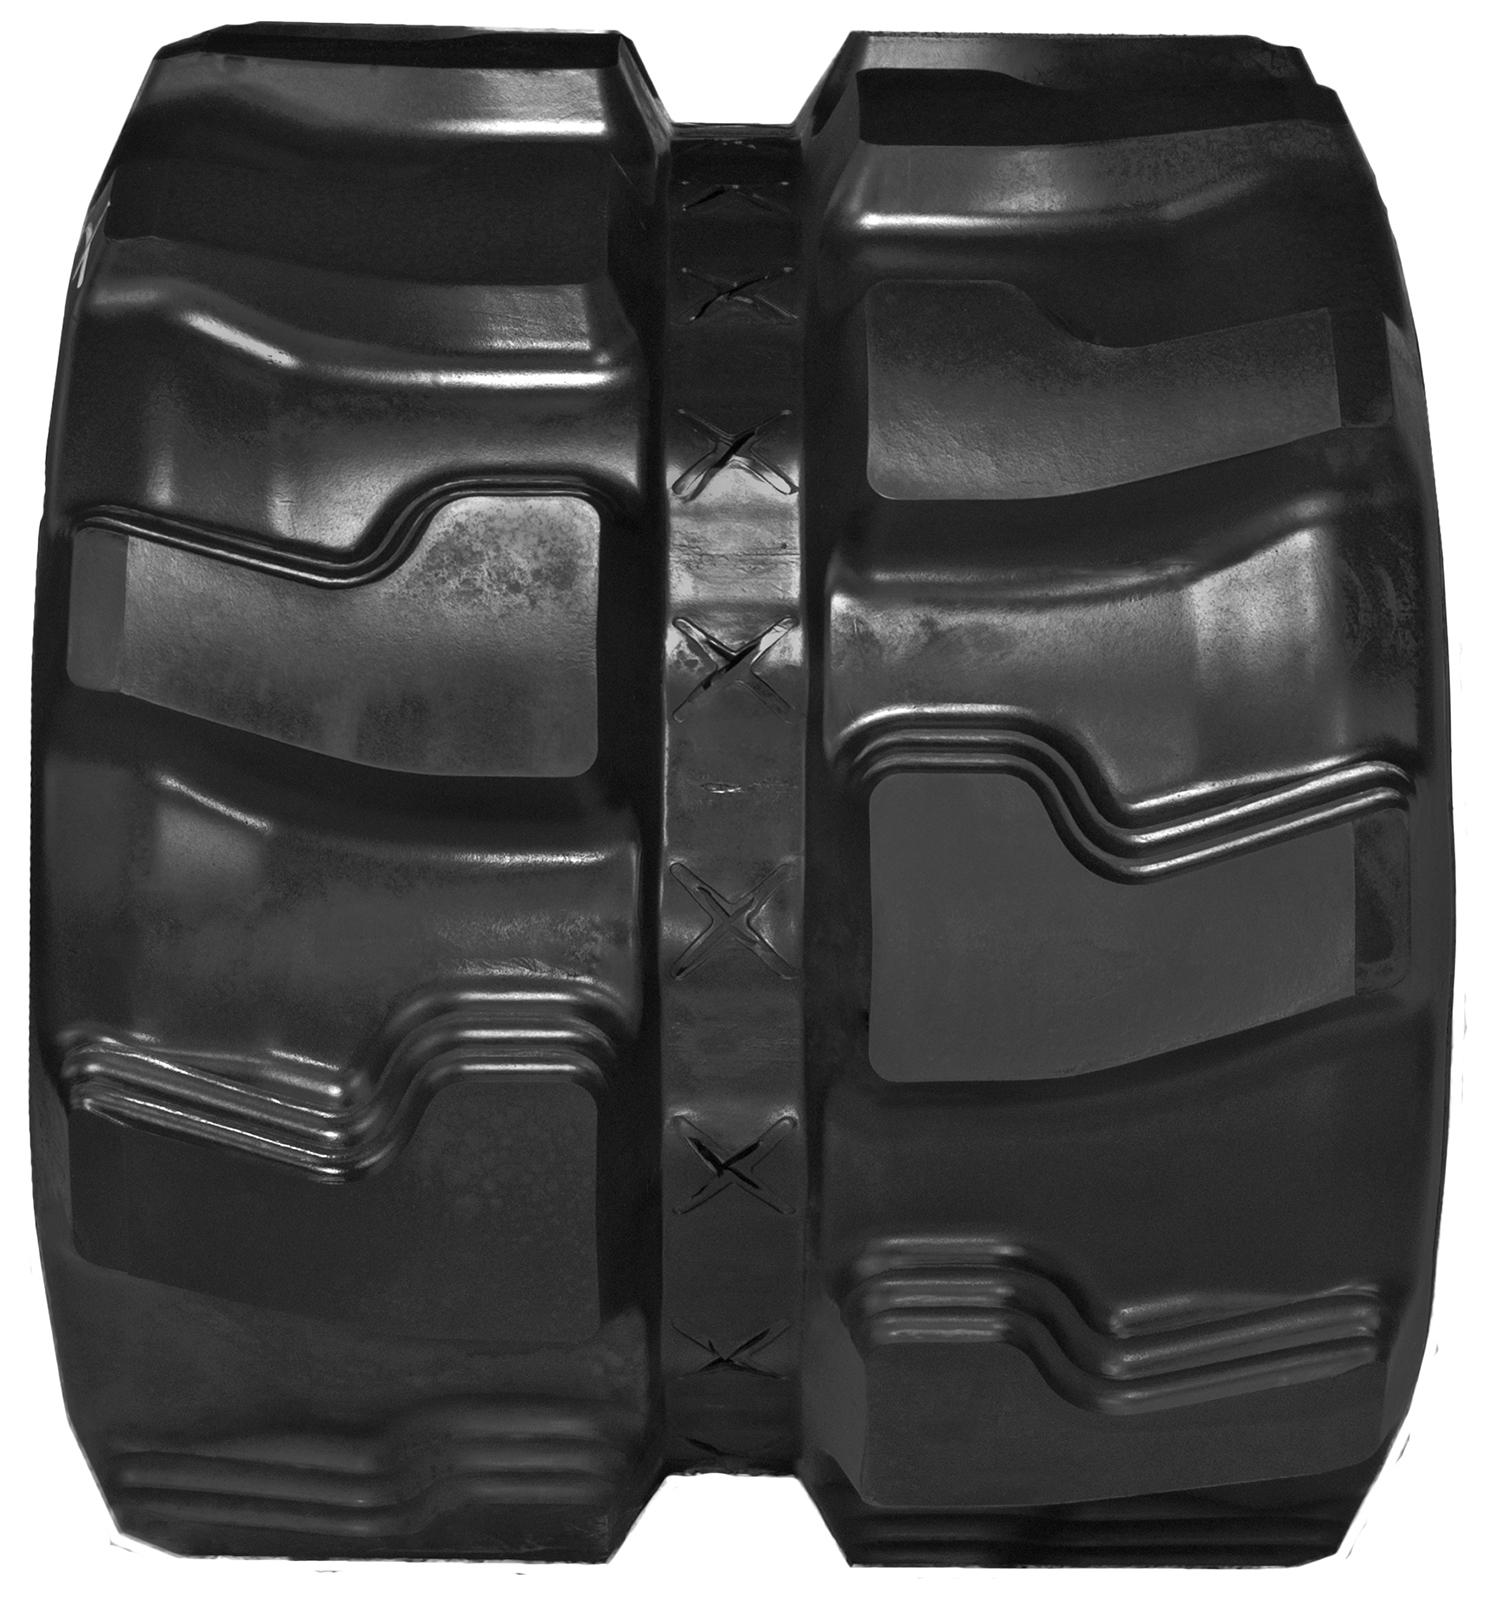 set of 2 16" camso heavy duty rubber track (400x72.5kx74)